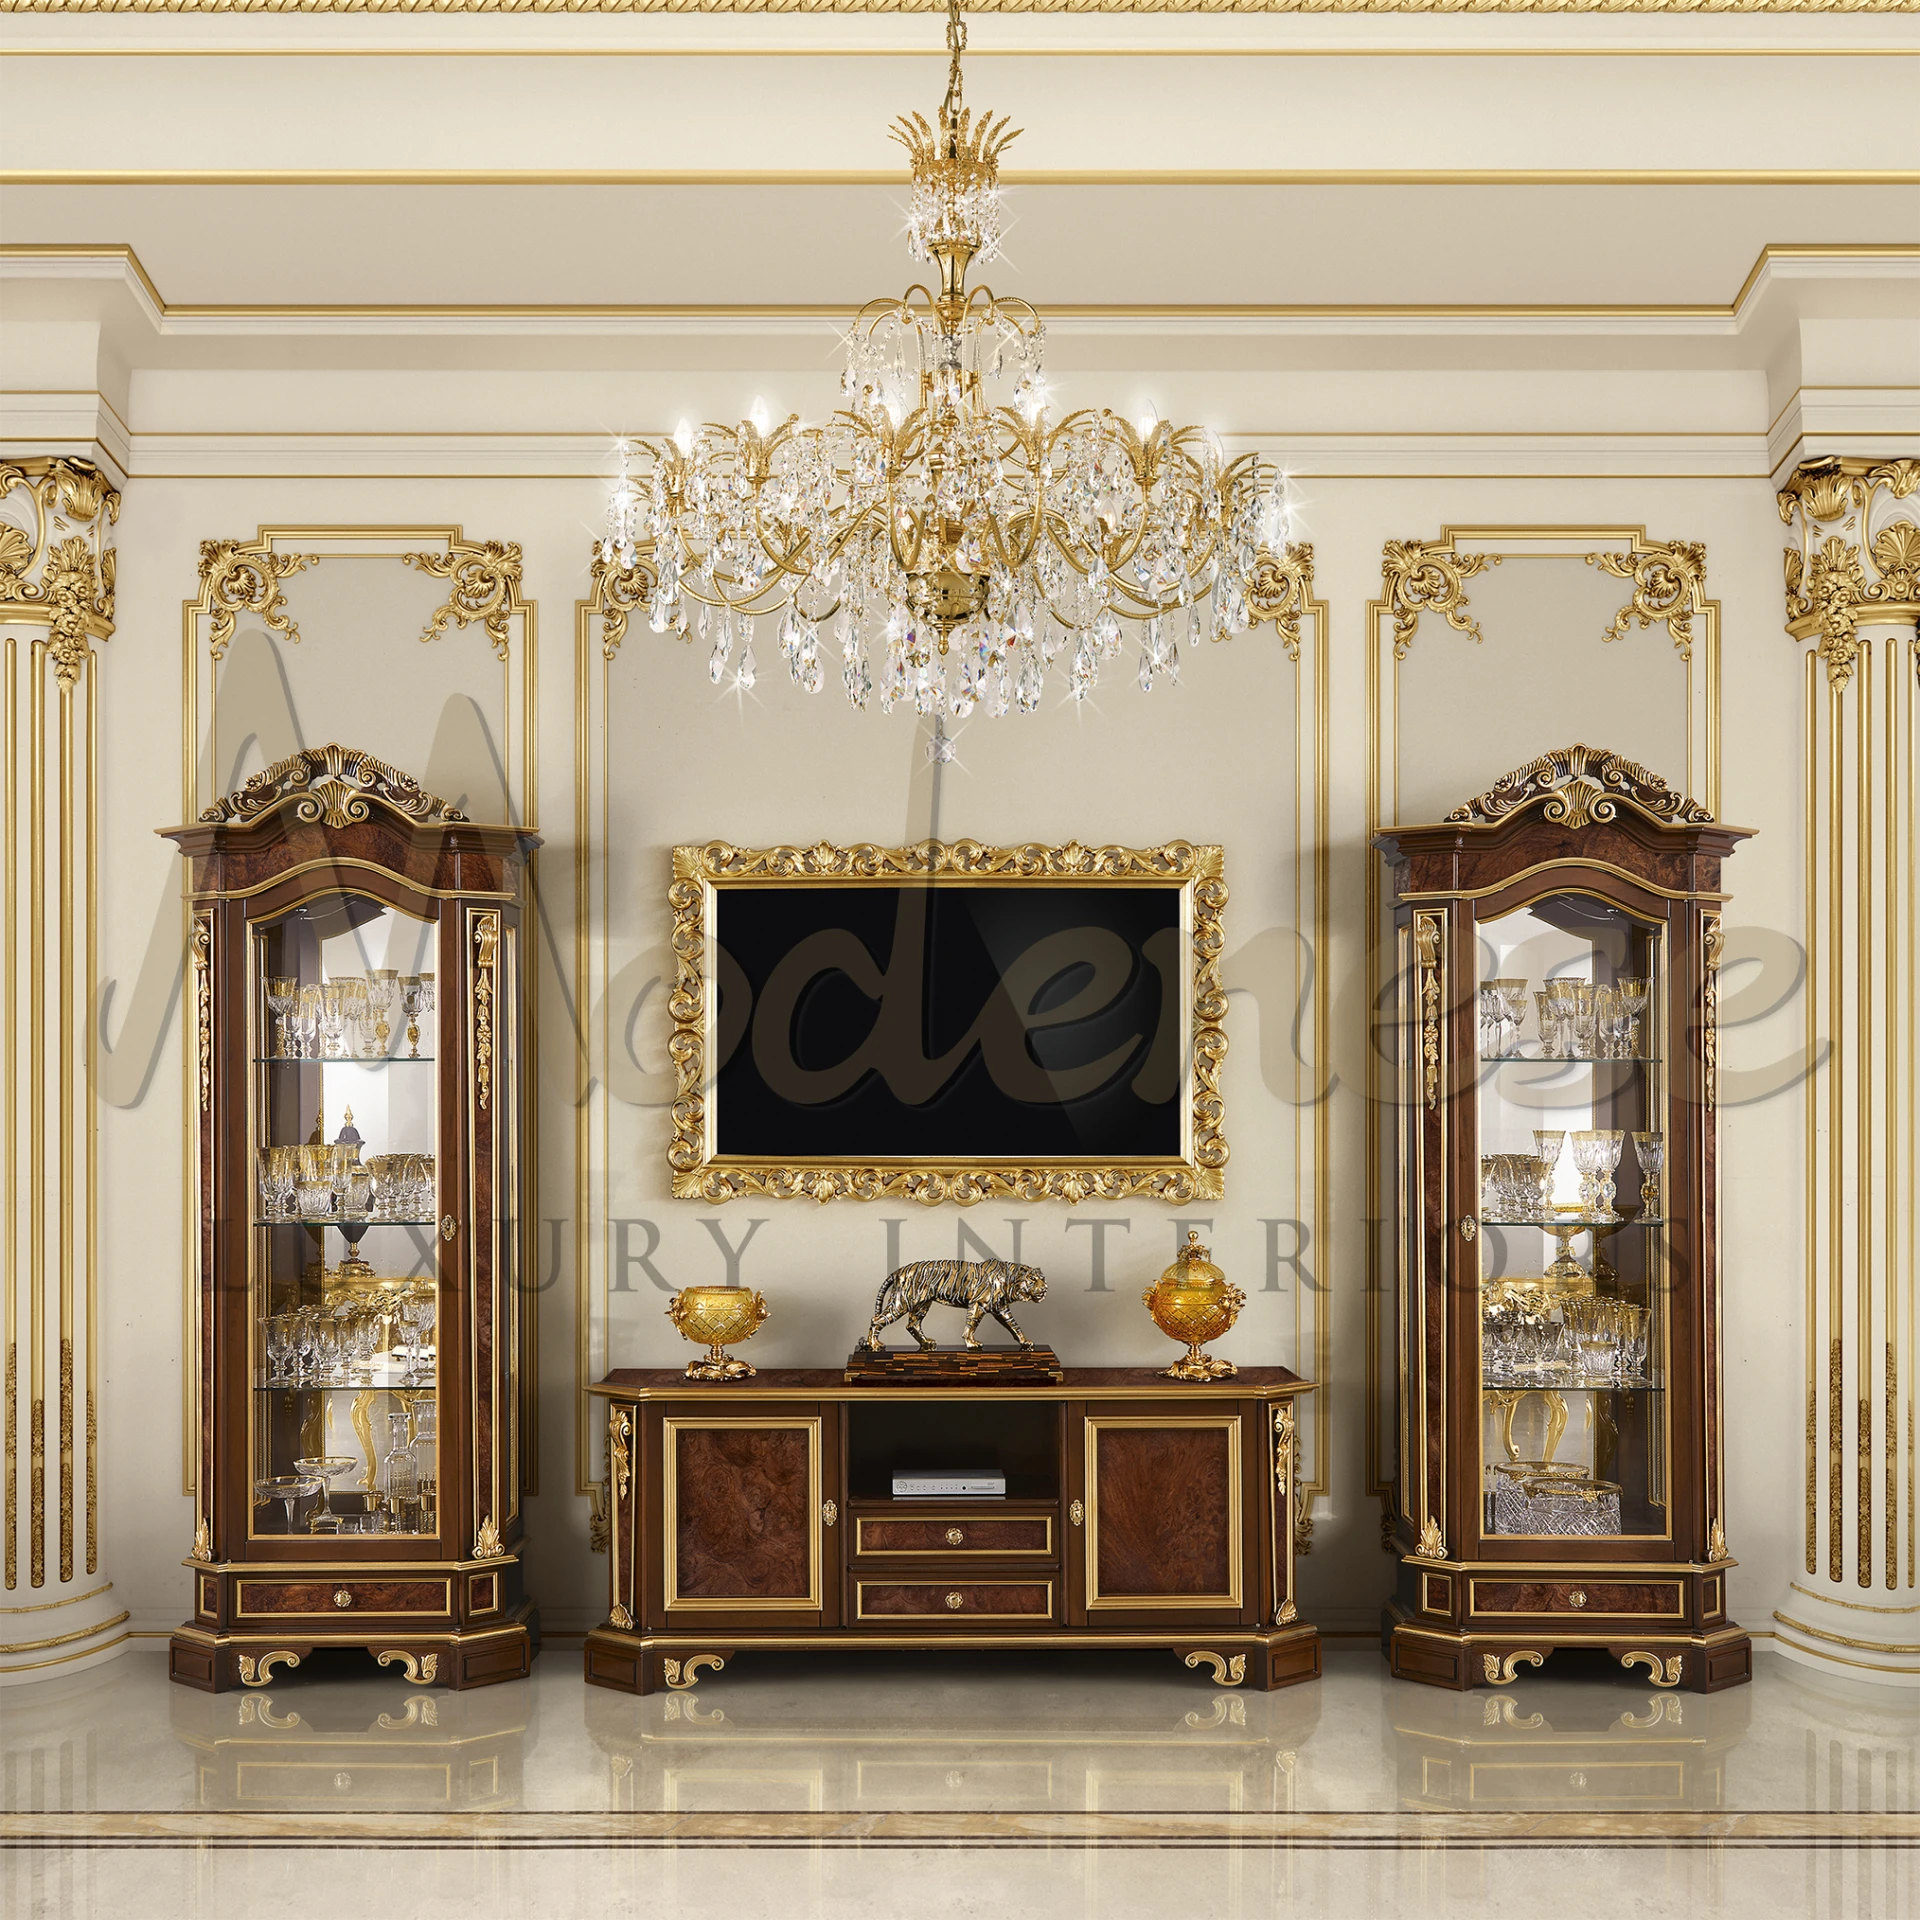 Ornate traditional TV frame in gold leaf, featuring scrolls and floral motifs for a rich, classic look in luxury interiors.